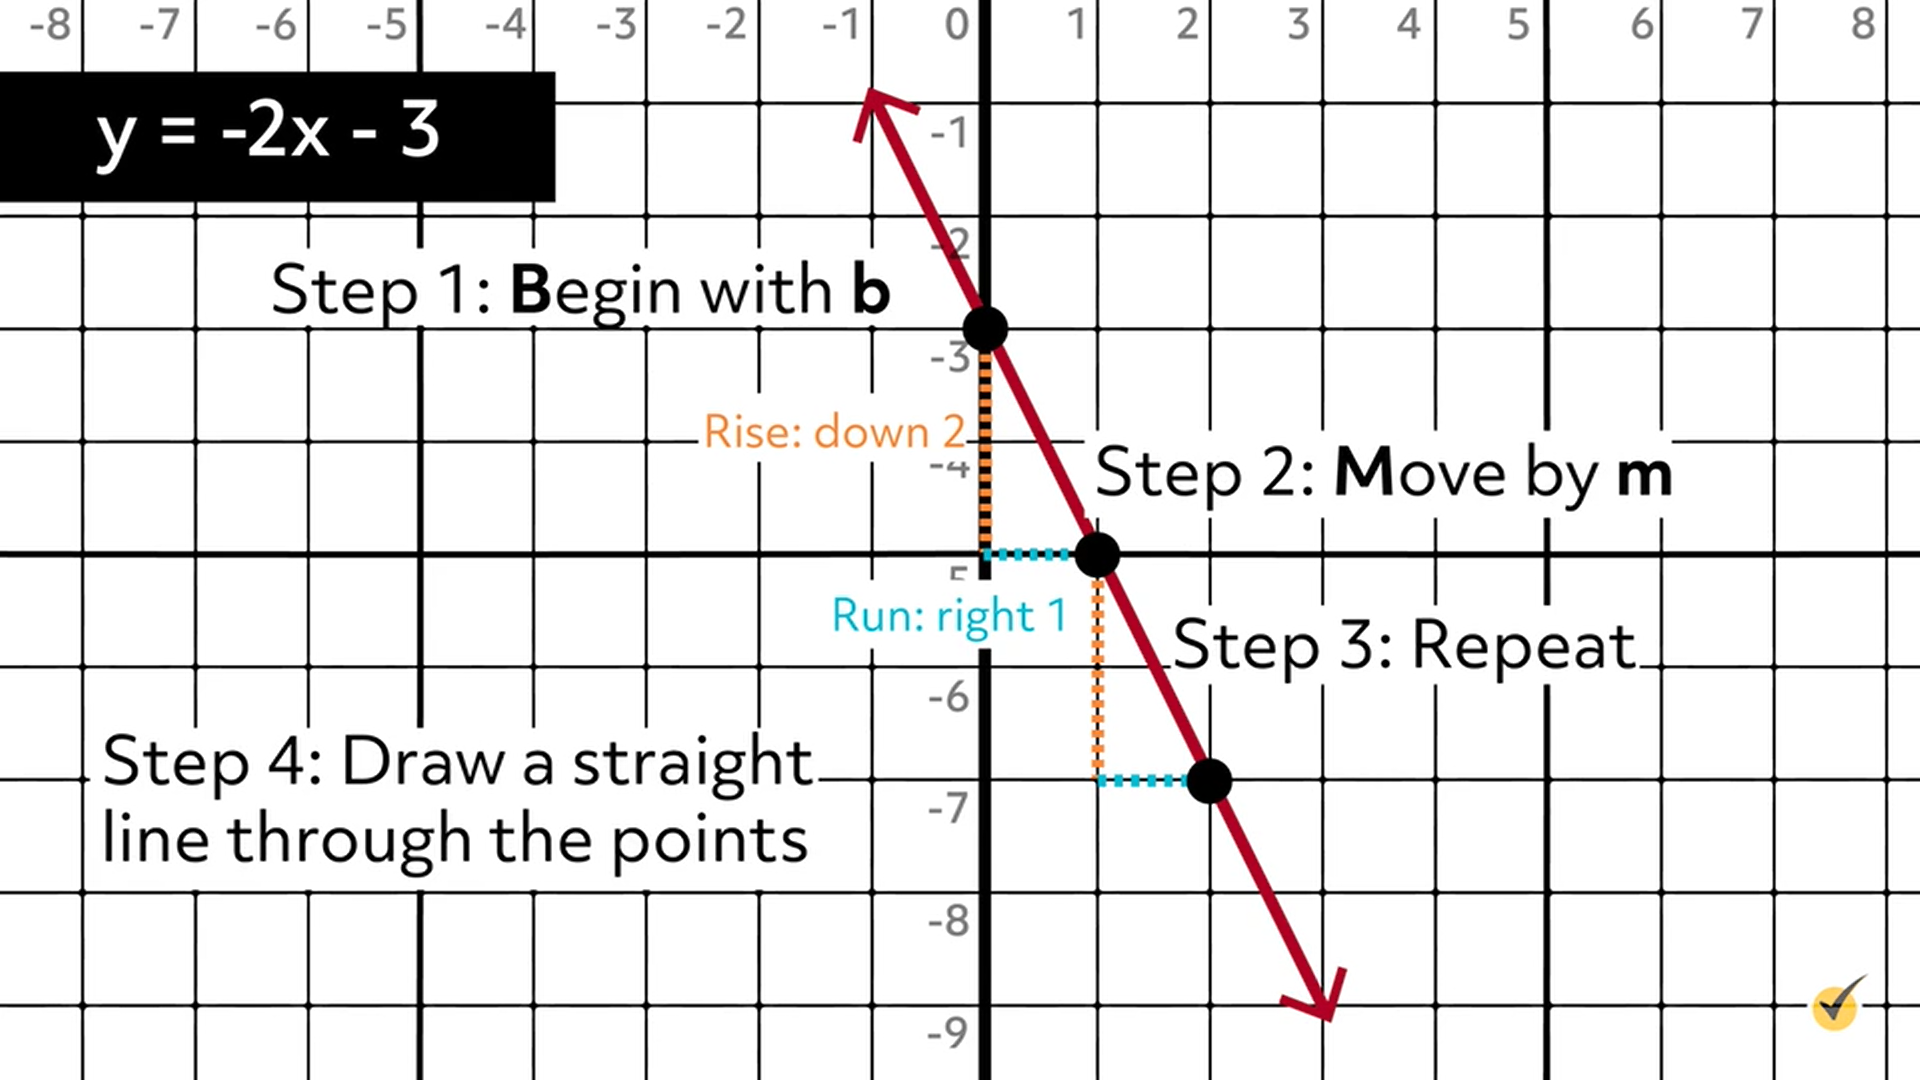 draw a straight line through the points